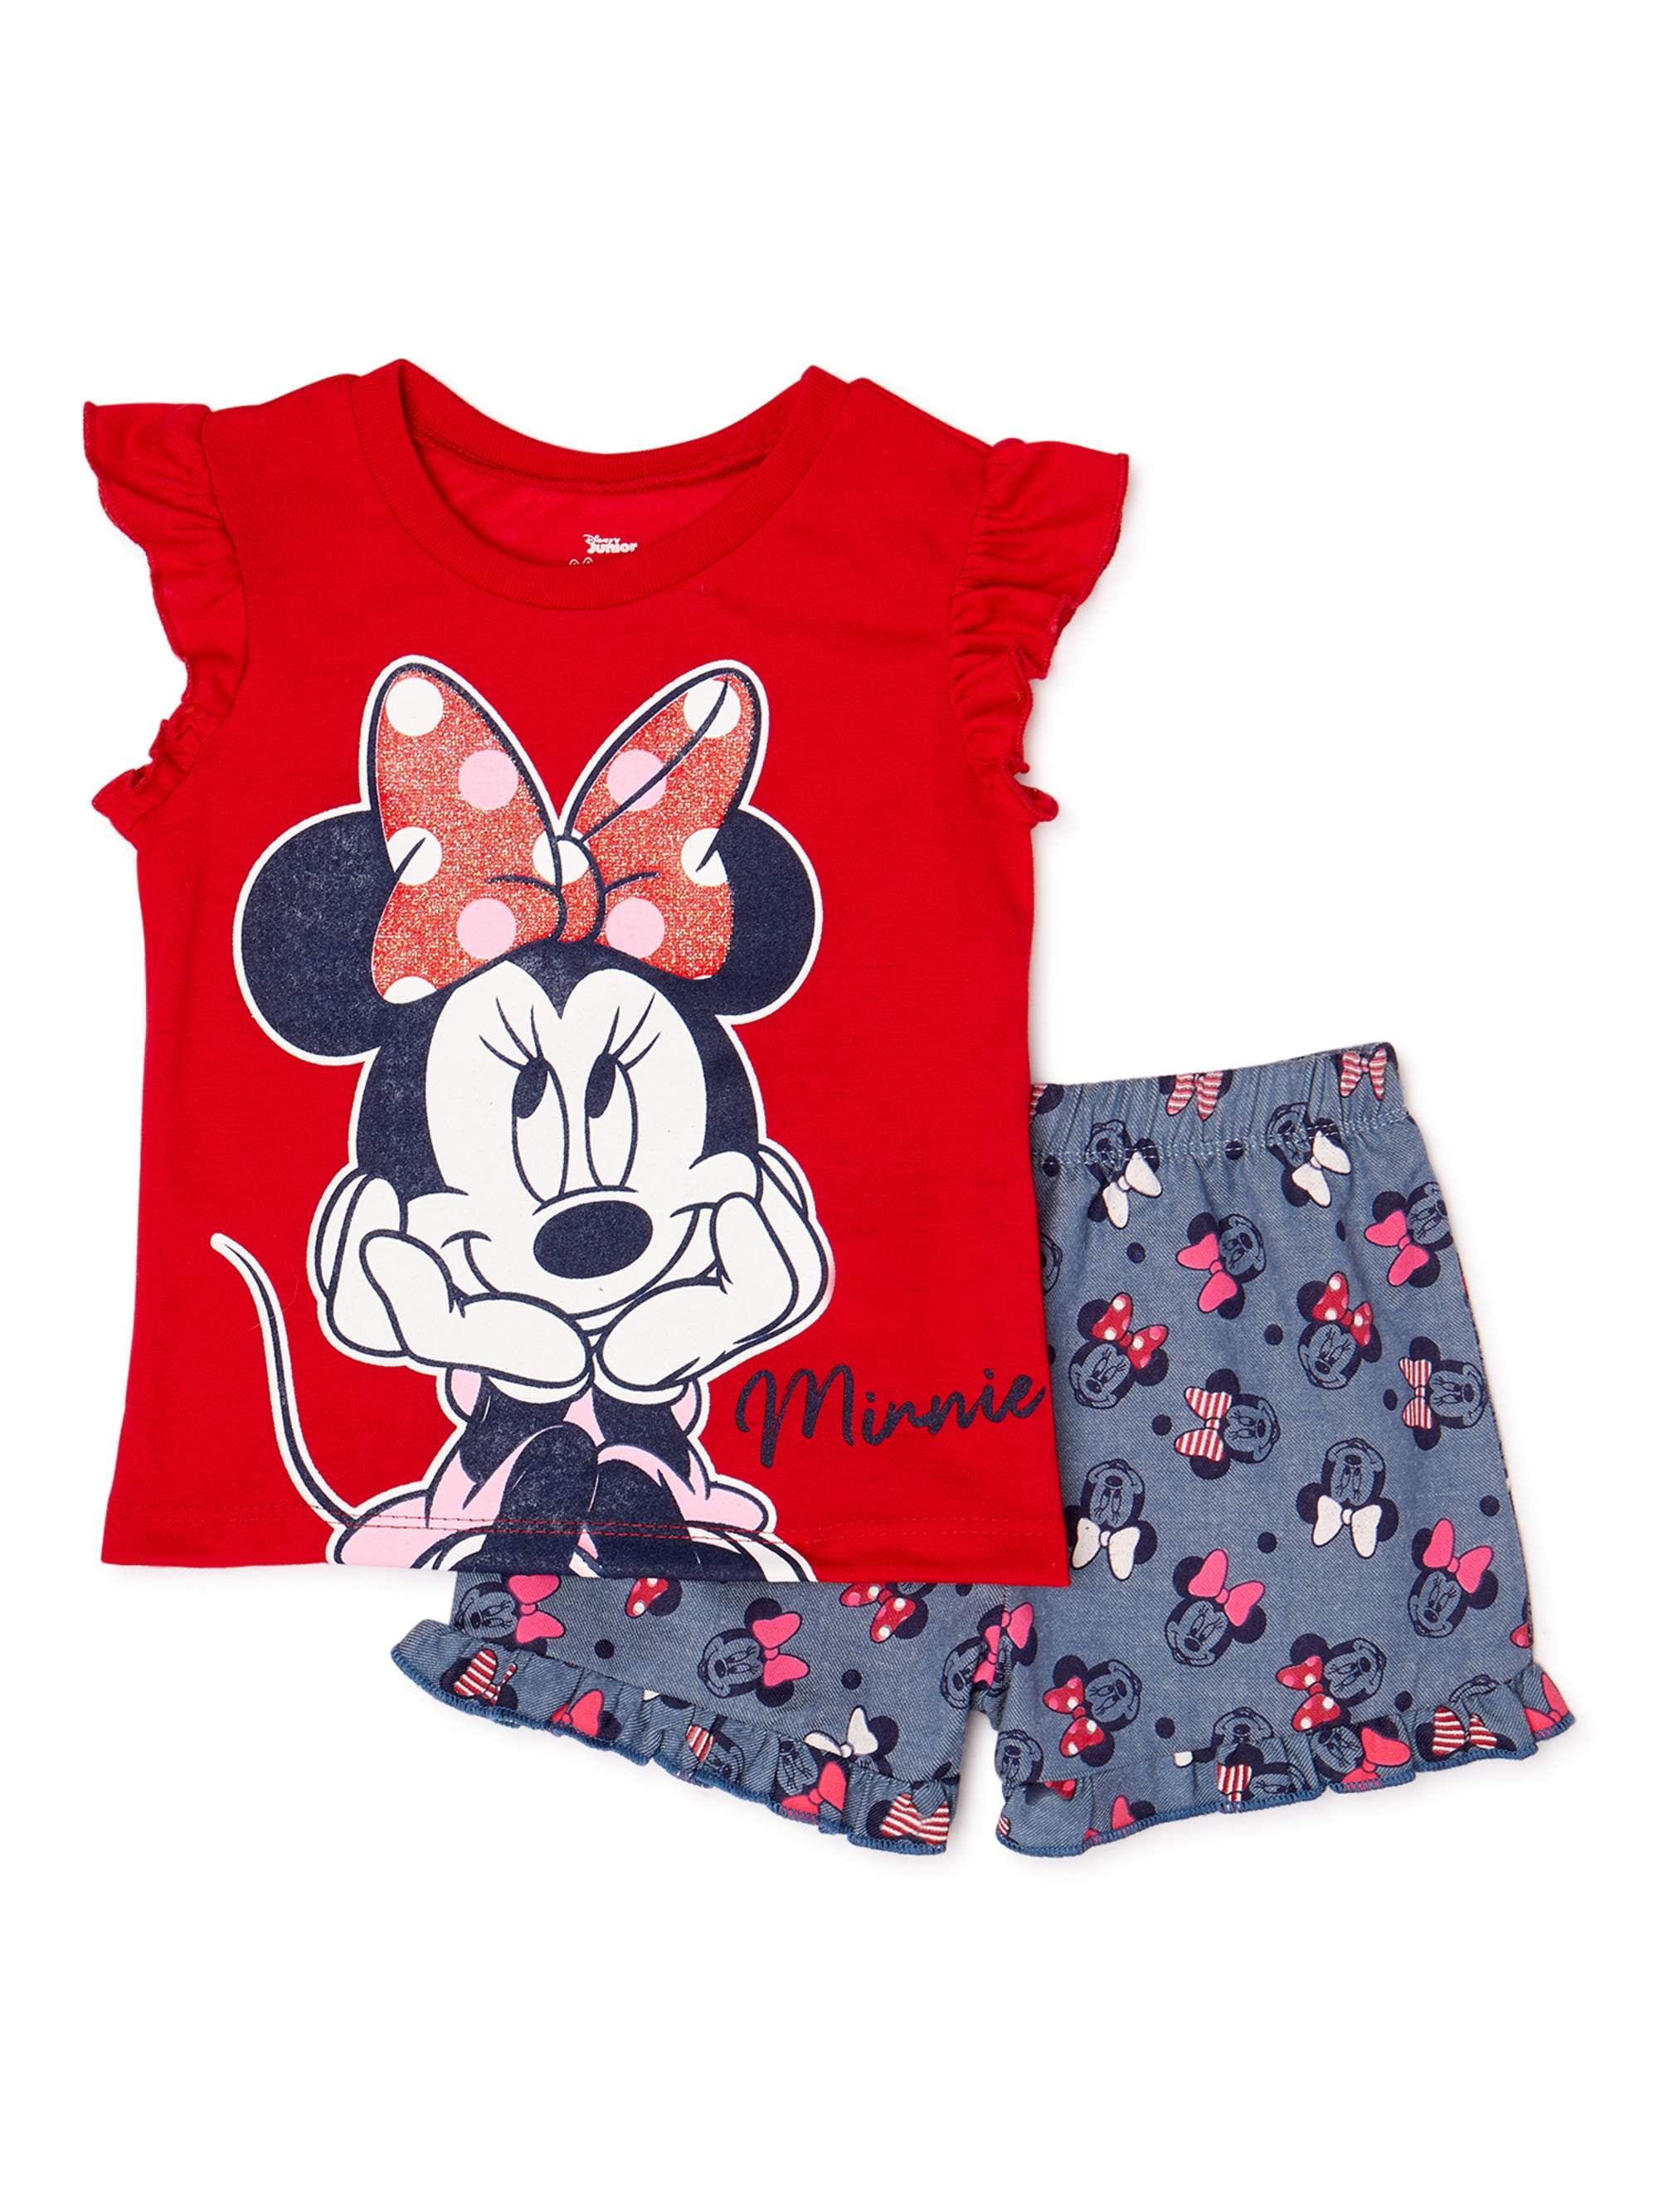 NEW Baby Girl Minnie Mouse Short Sleeve T-shirt Top & Shorts SET Size NB.6M.9M.2 